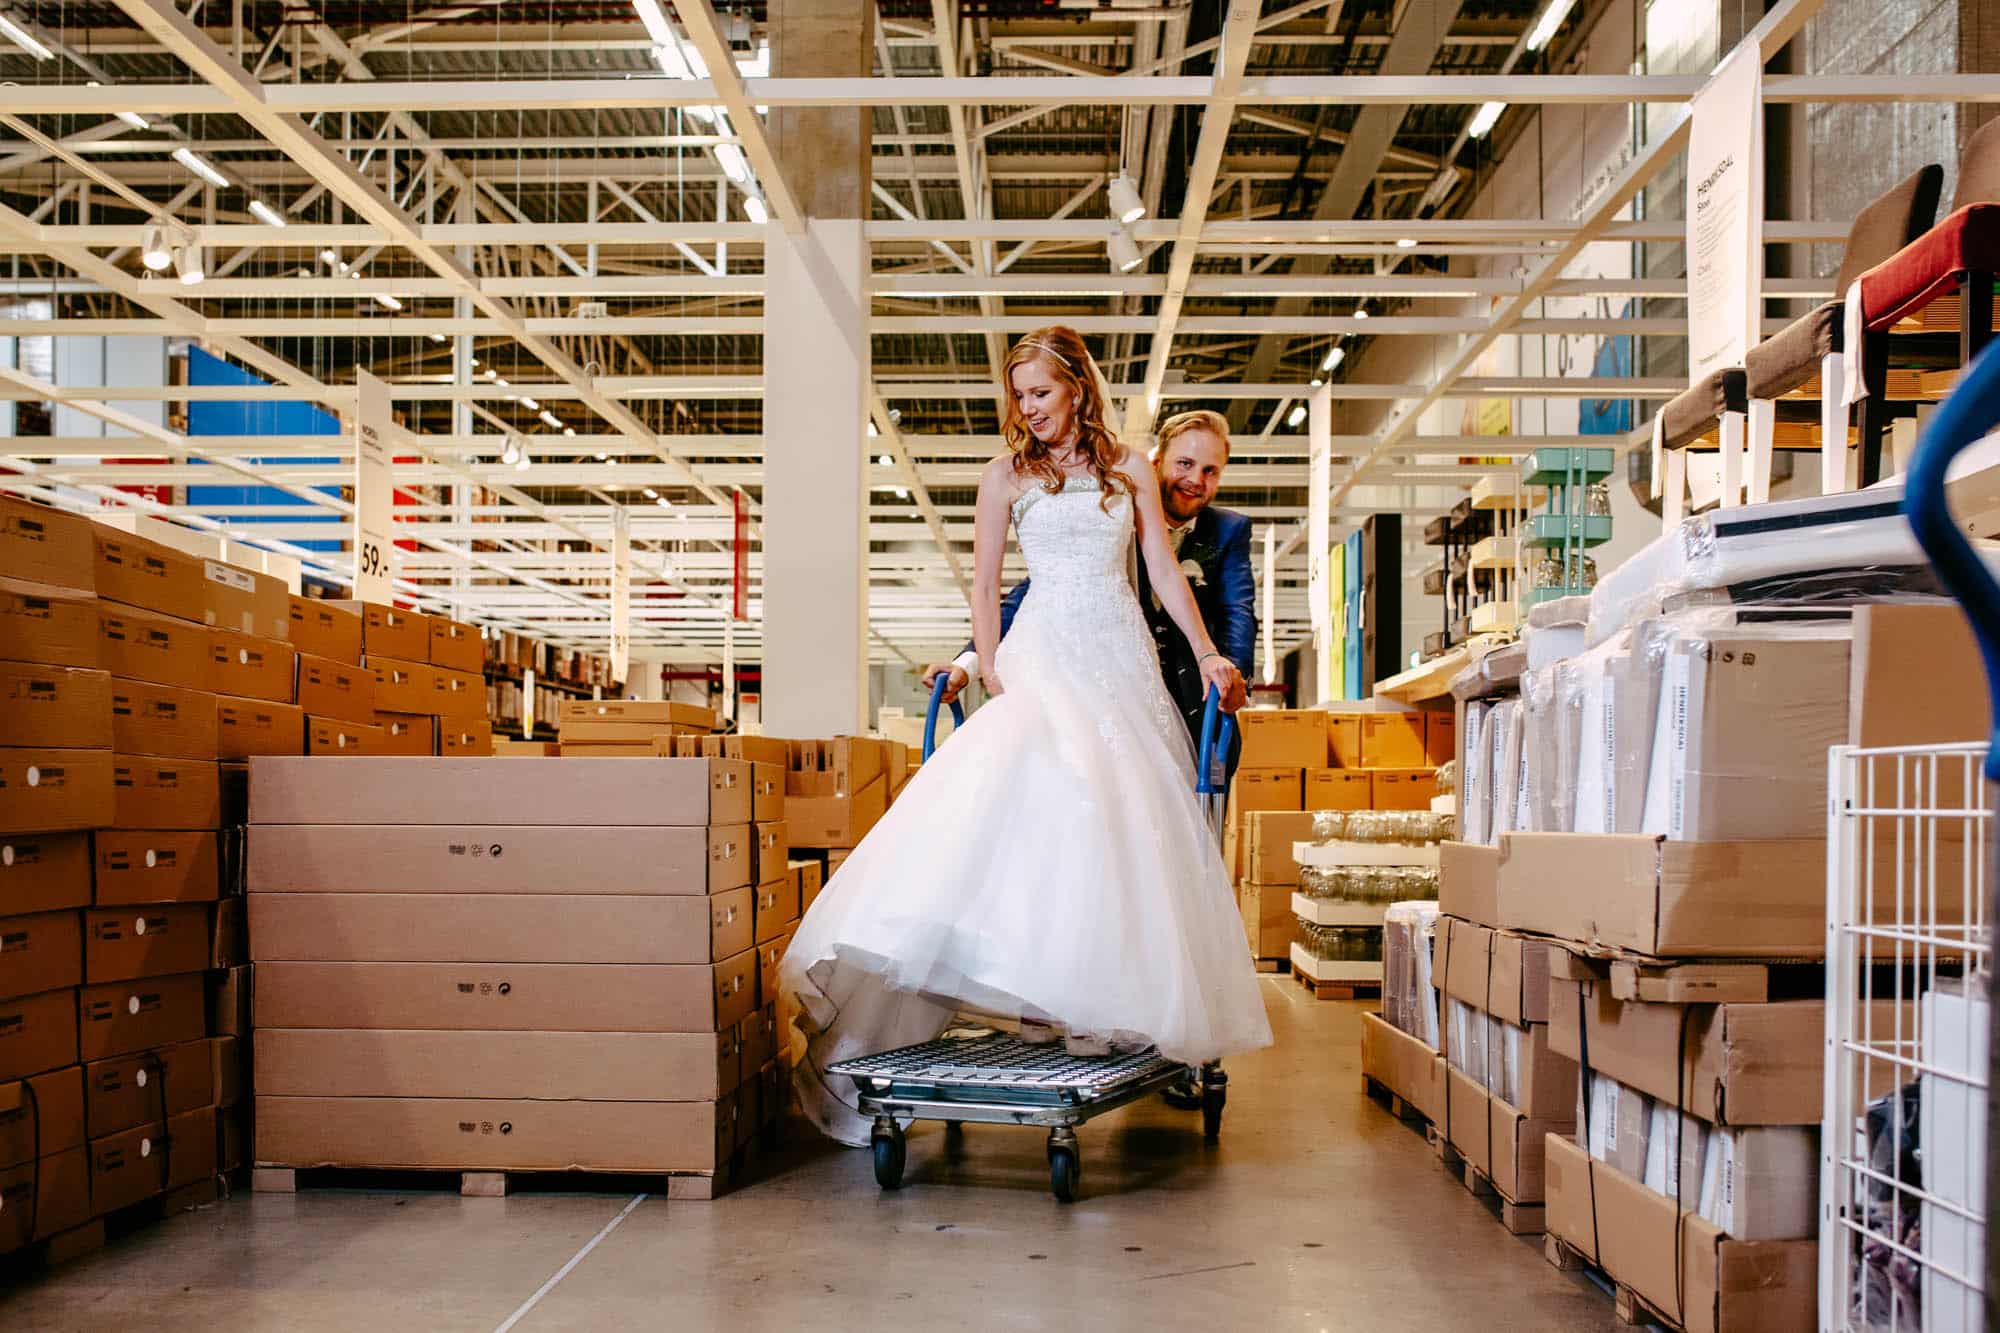 A bride and groom buying furniture in an IKEA warehouse, with the bride wearing a beautiful A-line wedding dress.